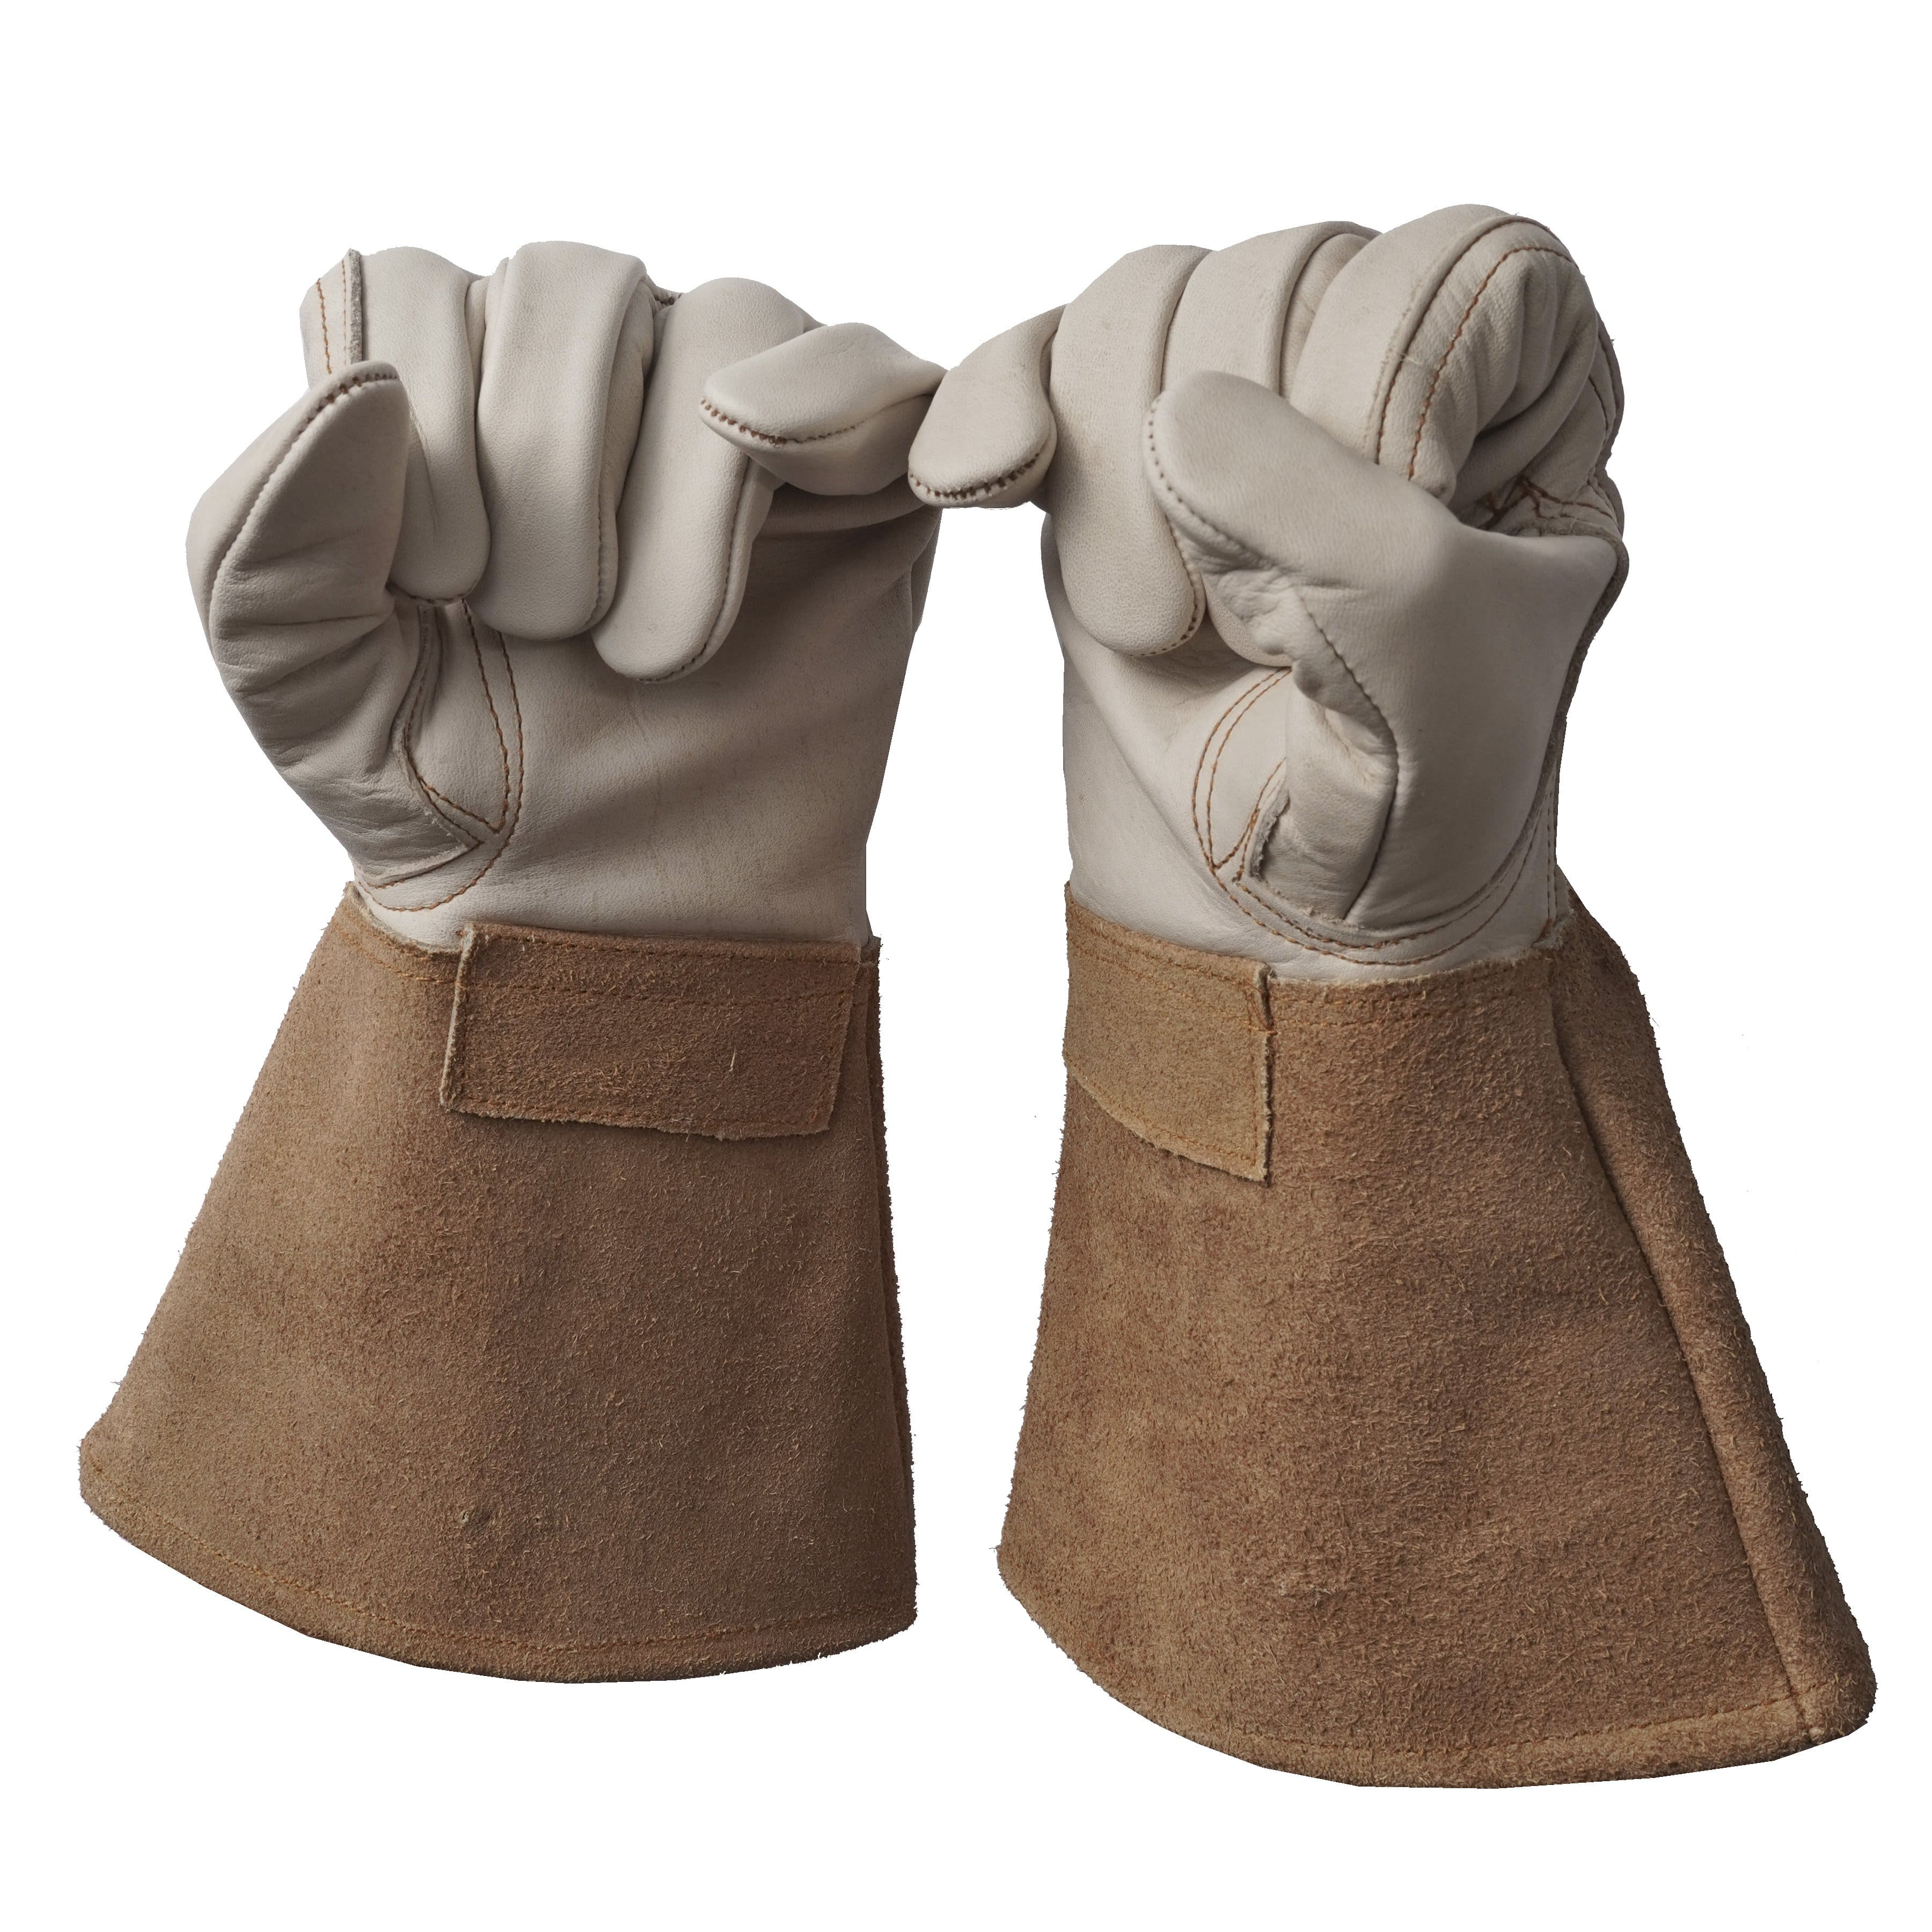 Lobo Comfort - Thorn Resistant Gloves -  Cowhide Leather